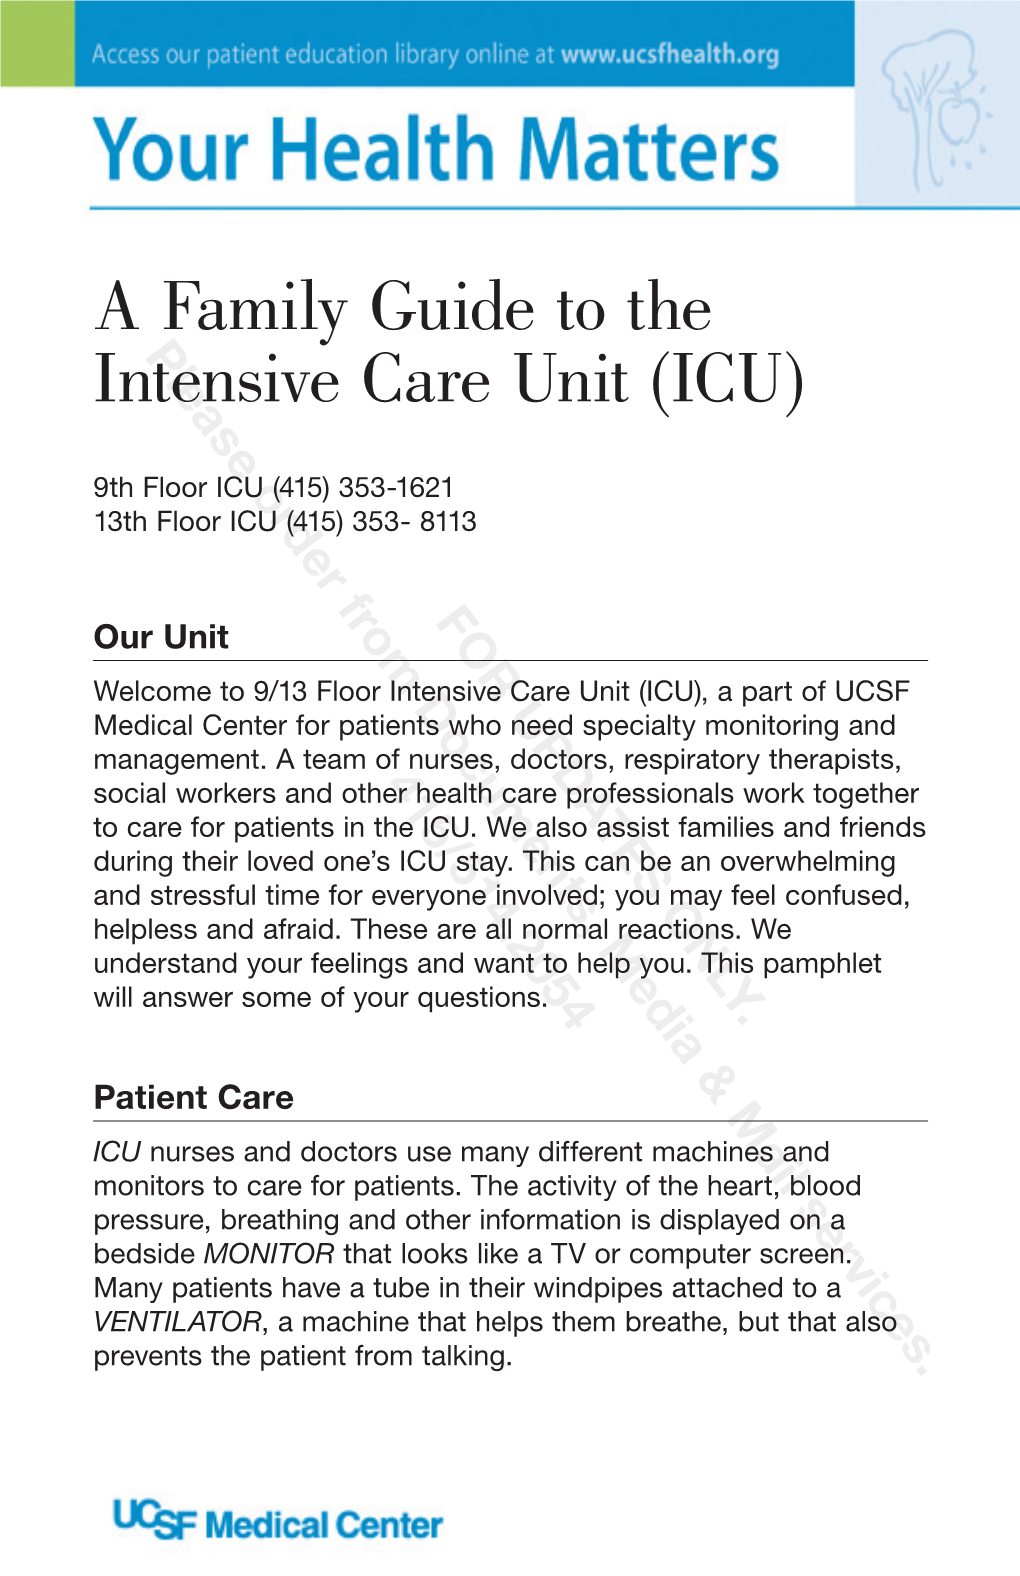 A Family Guide to the Intensive Care Unit (ICU)